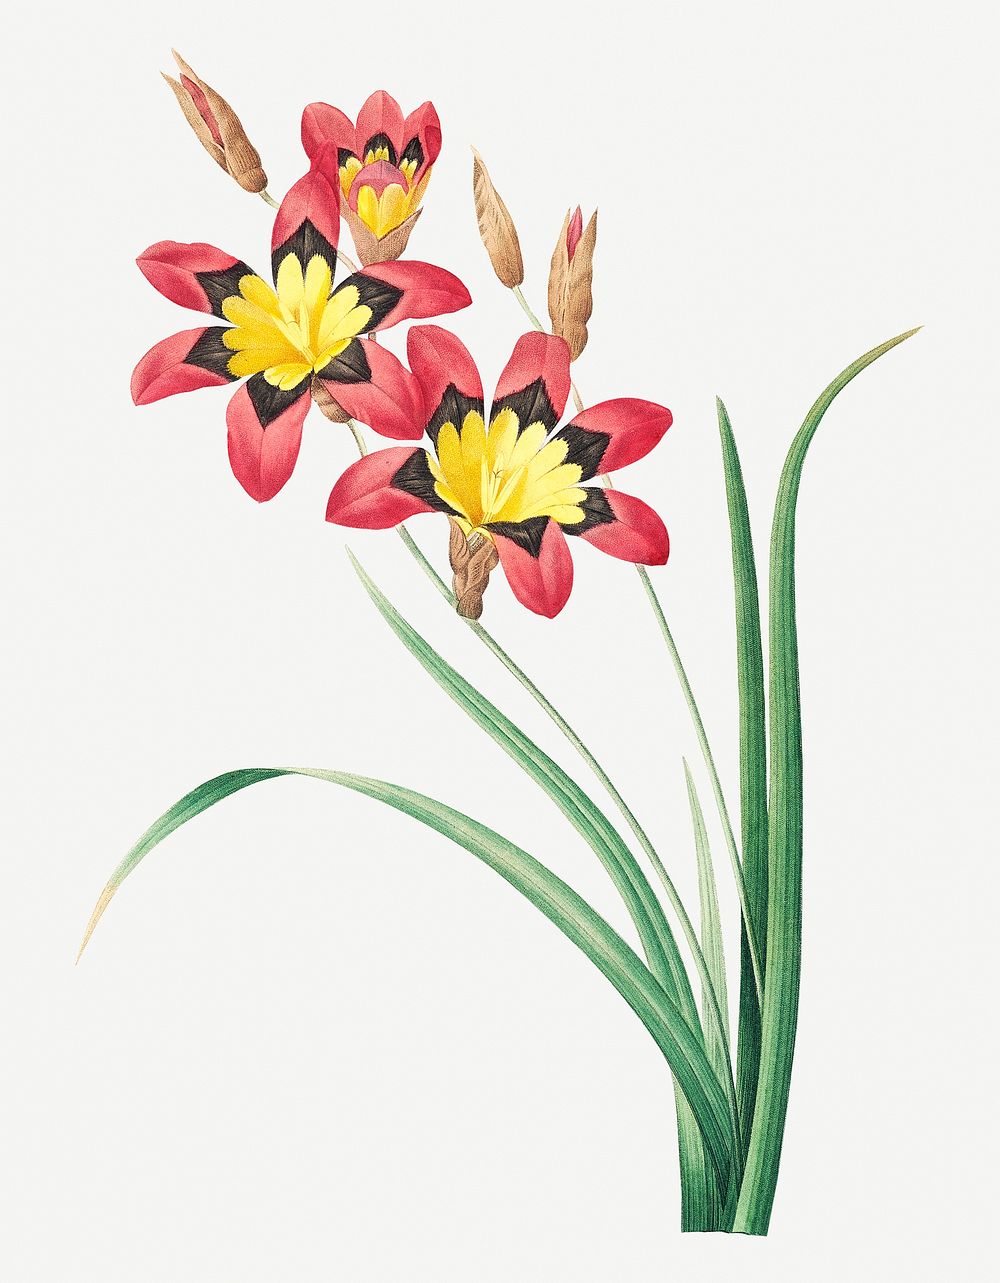 Harlequin flower psd botanical illustration, remixed from artworks by Pierre-Joseph Redout&eacute;